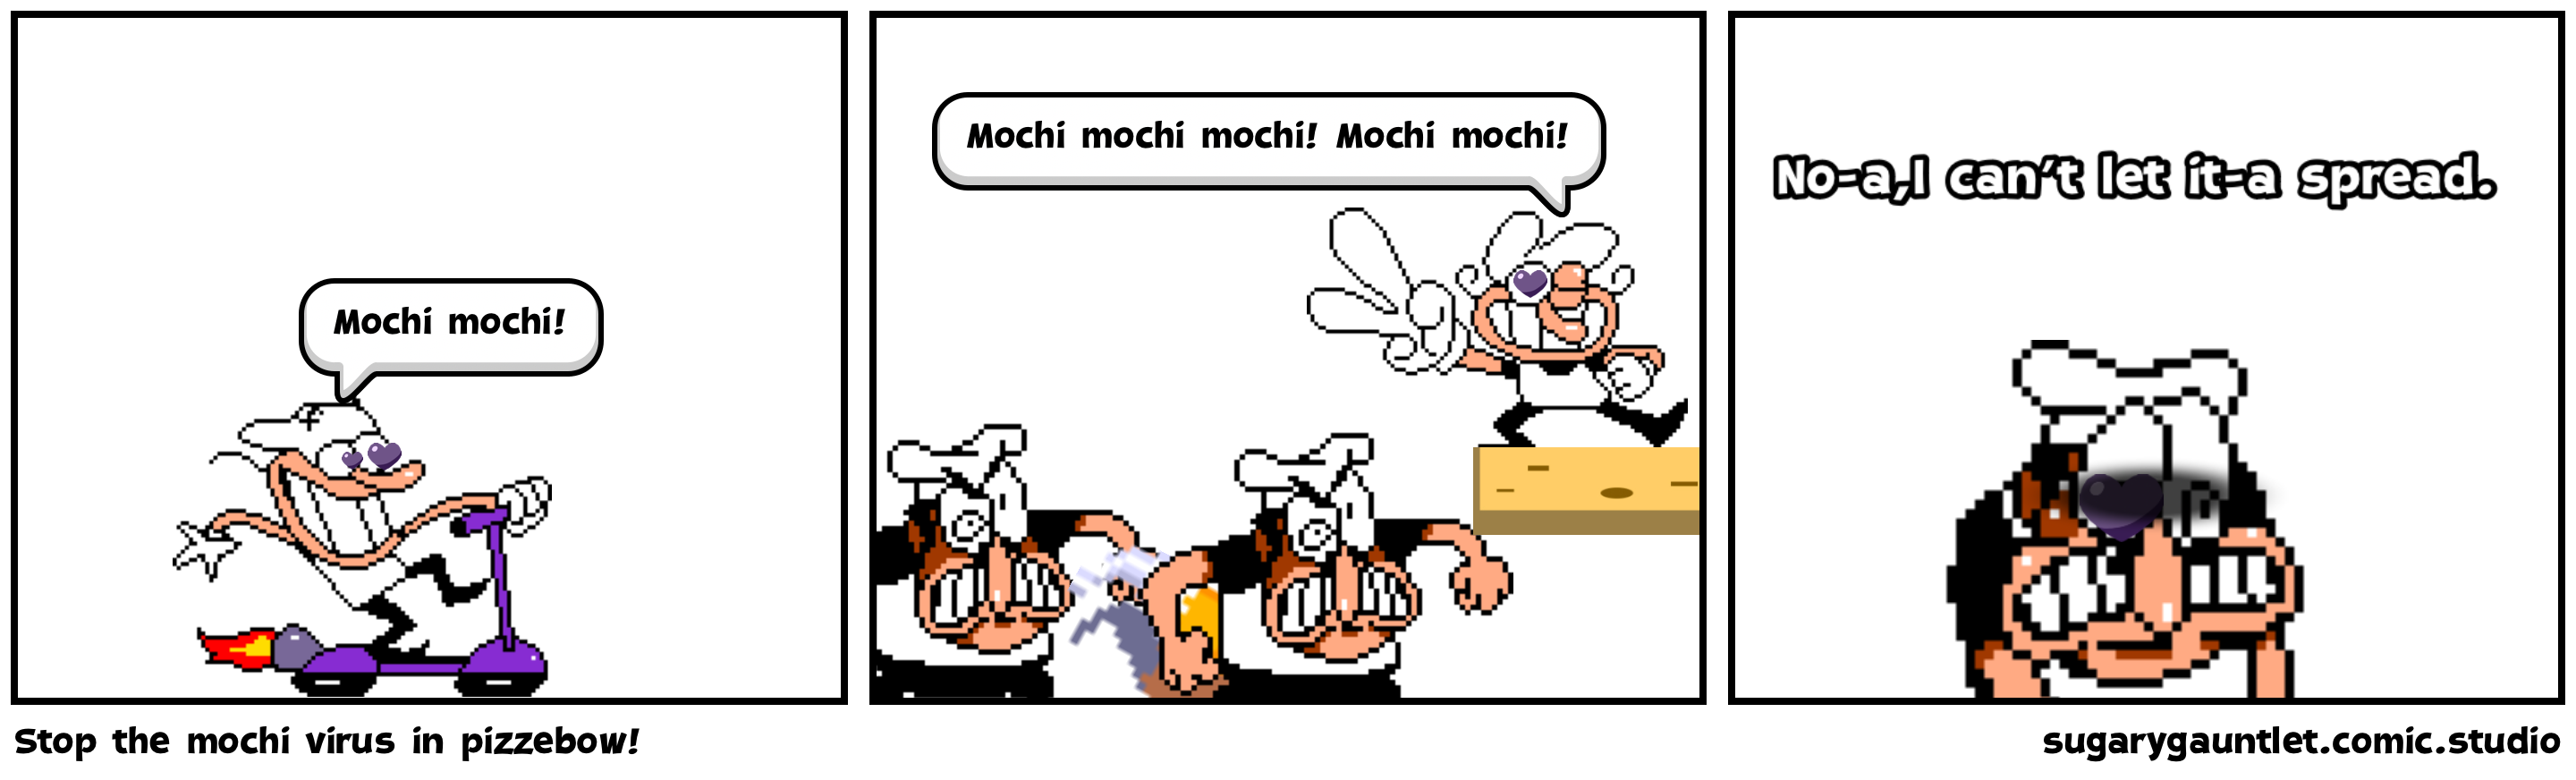 Stop the mochi virus in pizzebow!